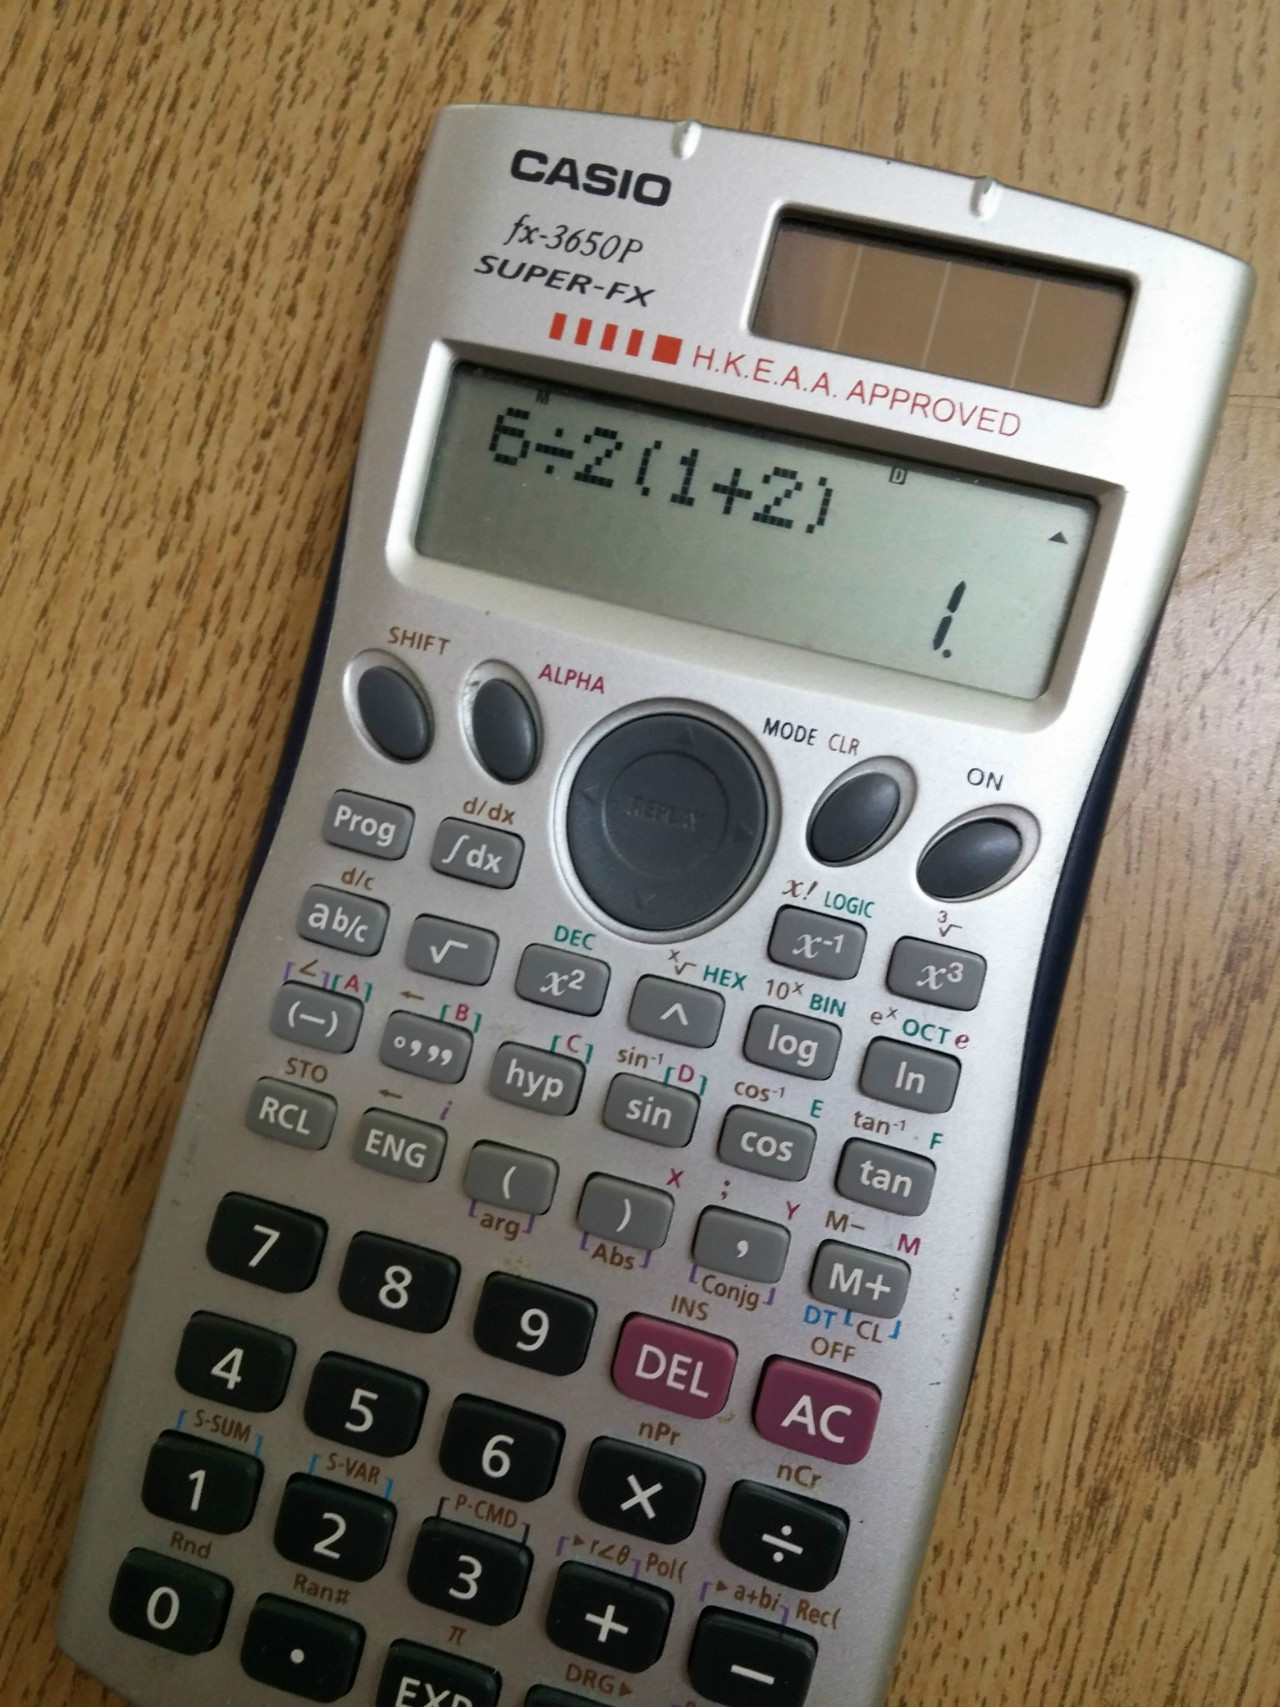 My
Casio calculator thinks that is 1.